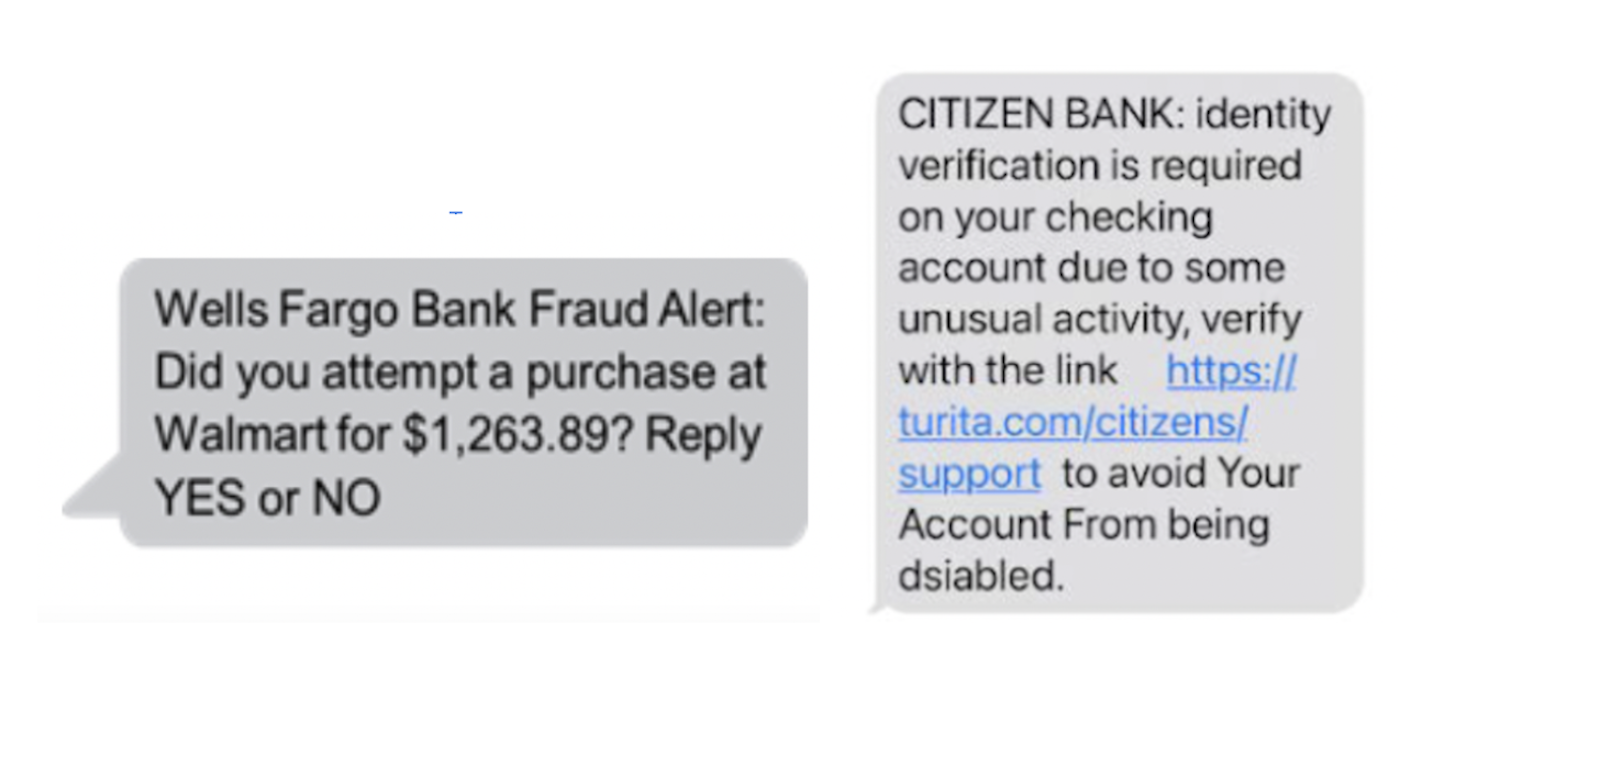 The top text scams of 2022? Messages impersonating banks increased 20